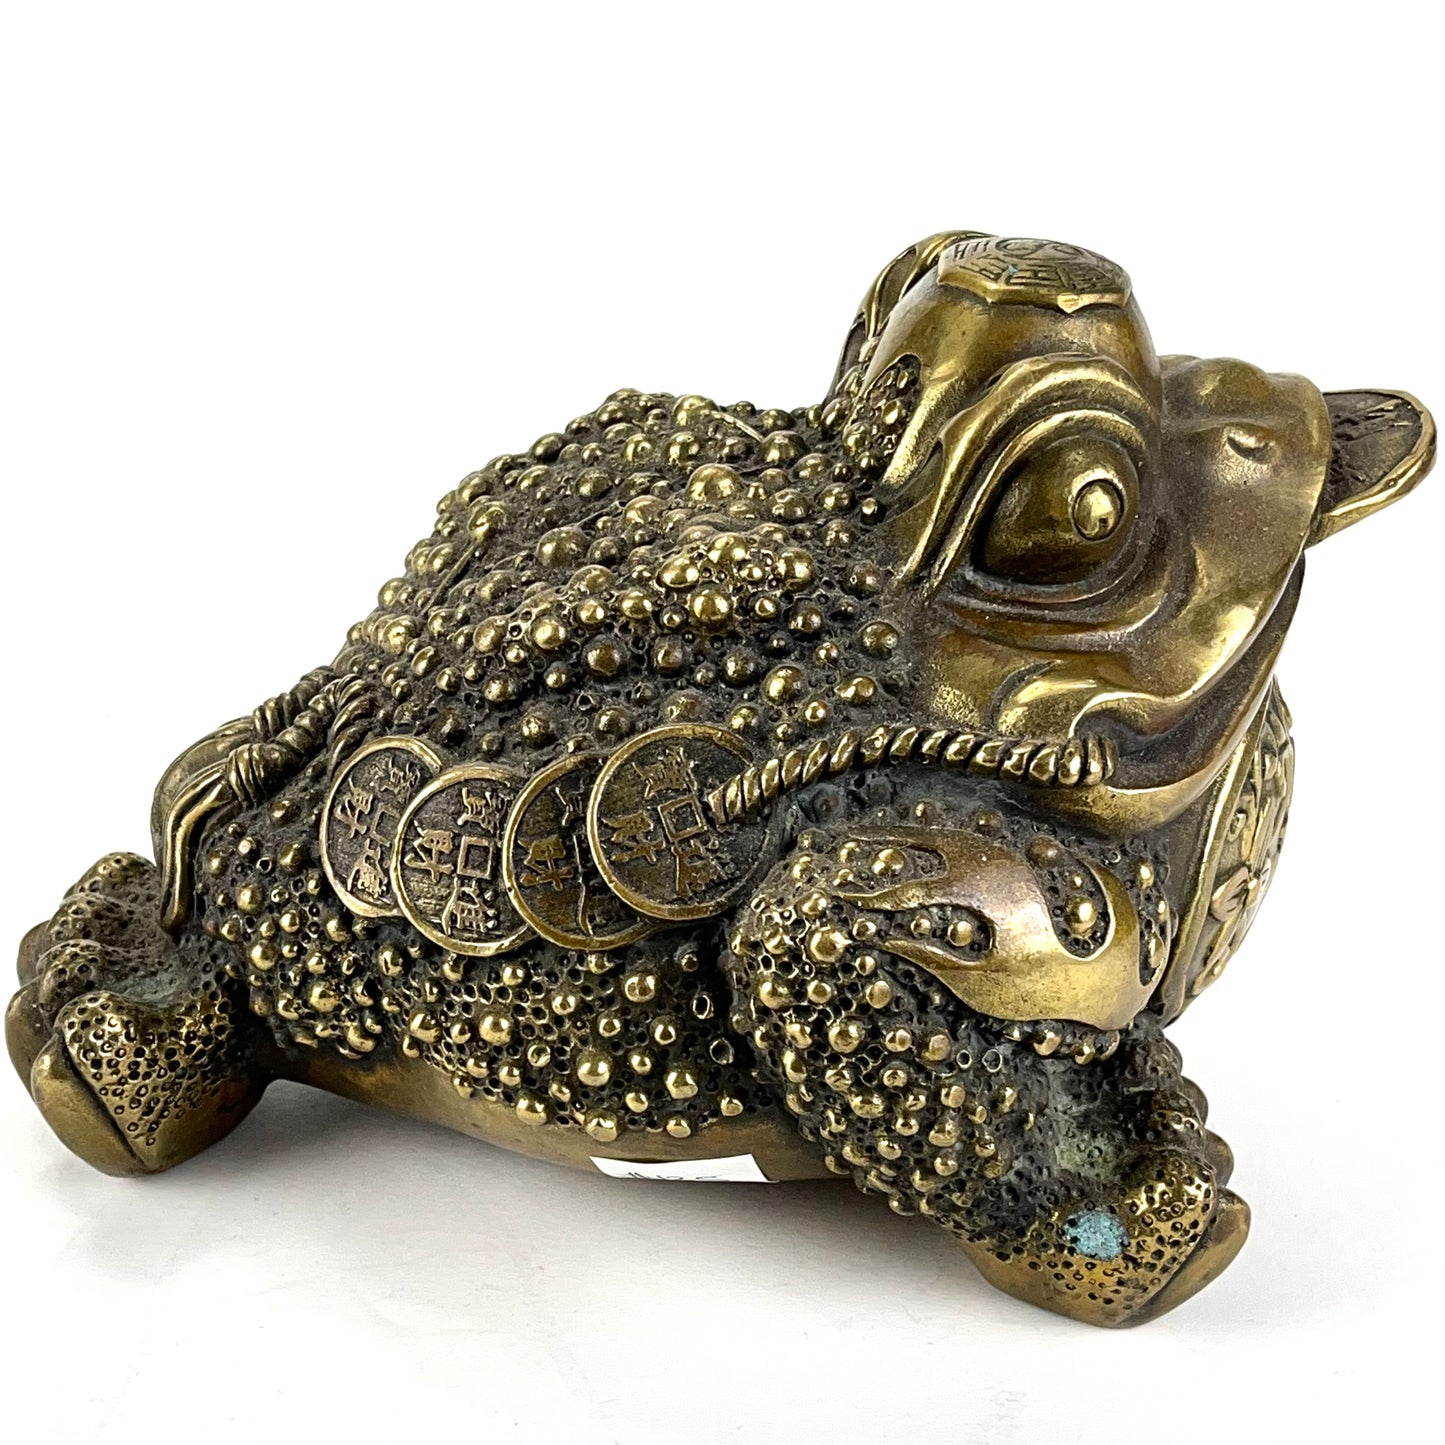 Vintage Chinese Bronze Statue Money Toad 5”